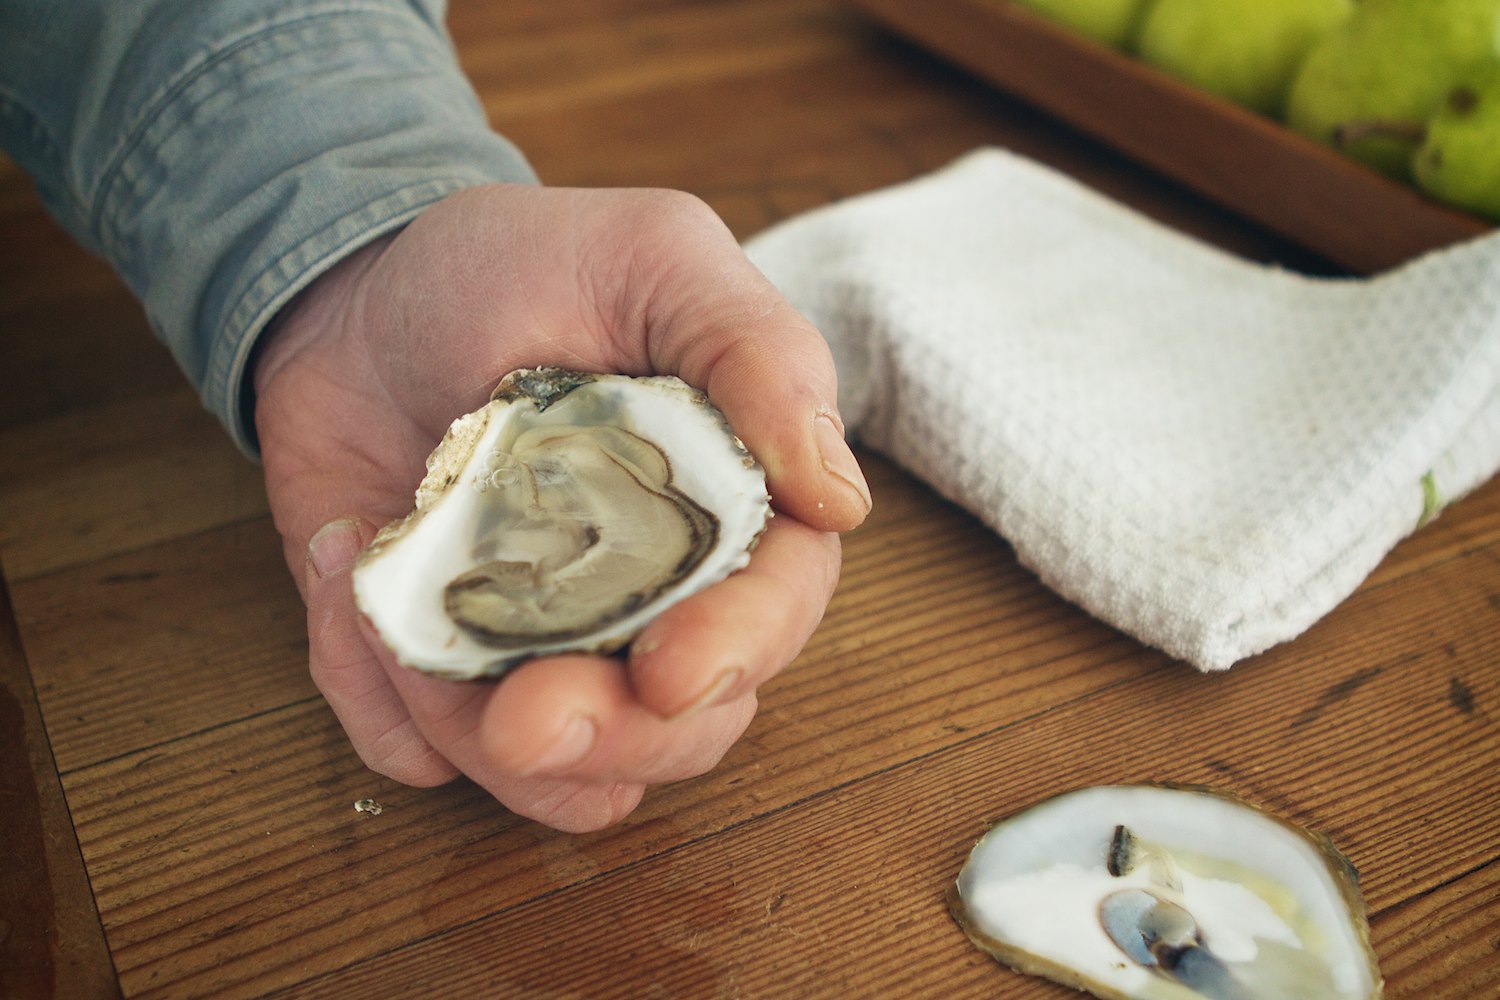 How to Shuck Oysters at Home - TipBuzz